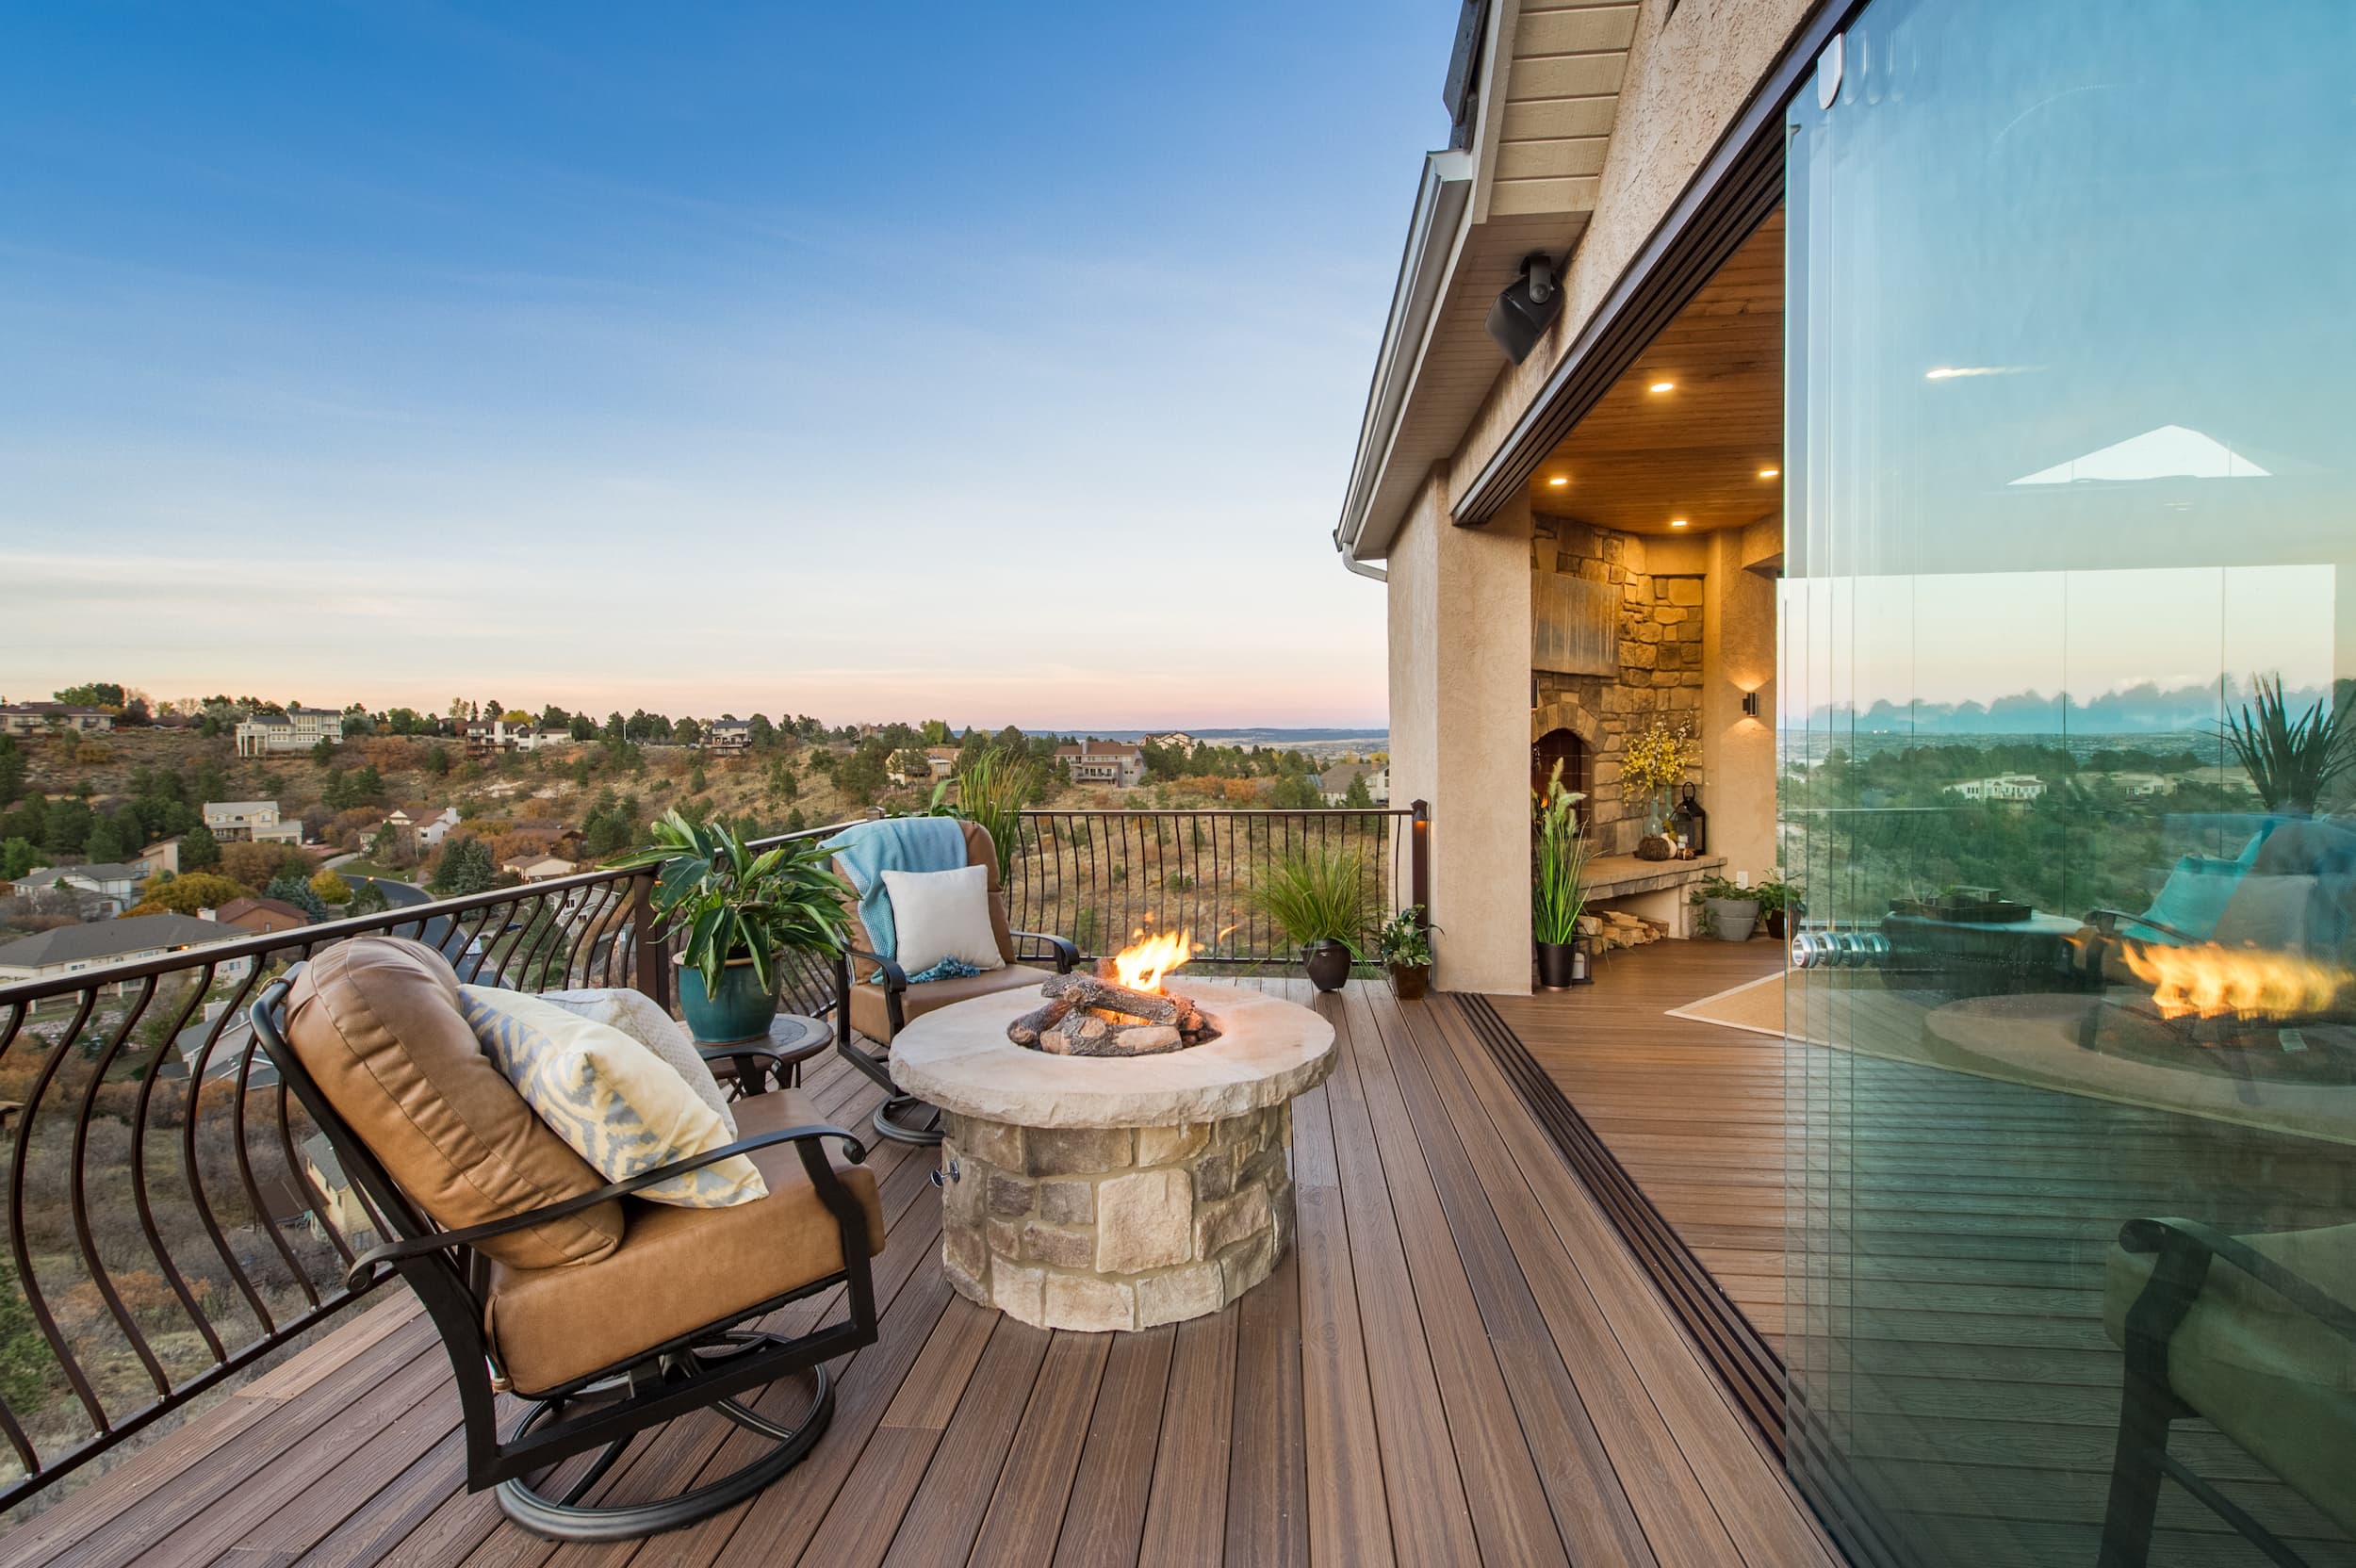 A deck with a fire pit overlooking a city.